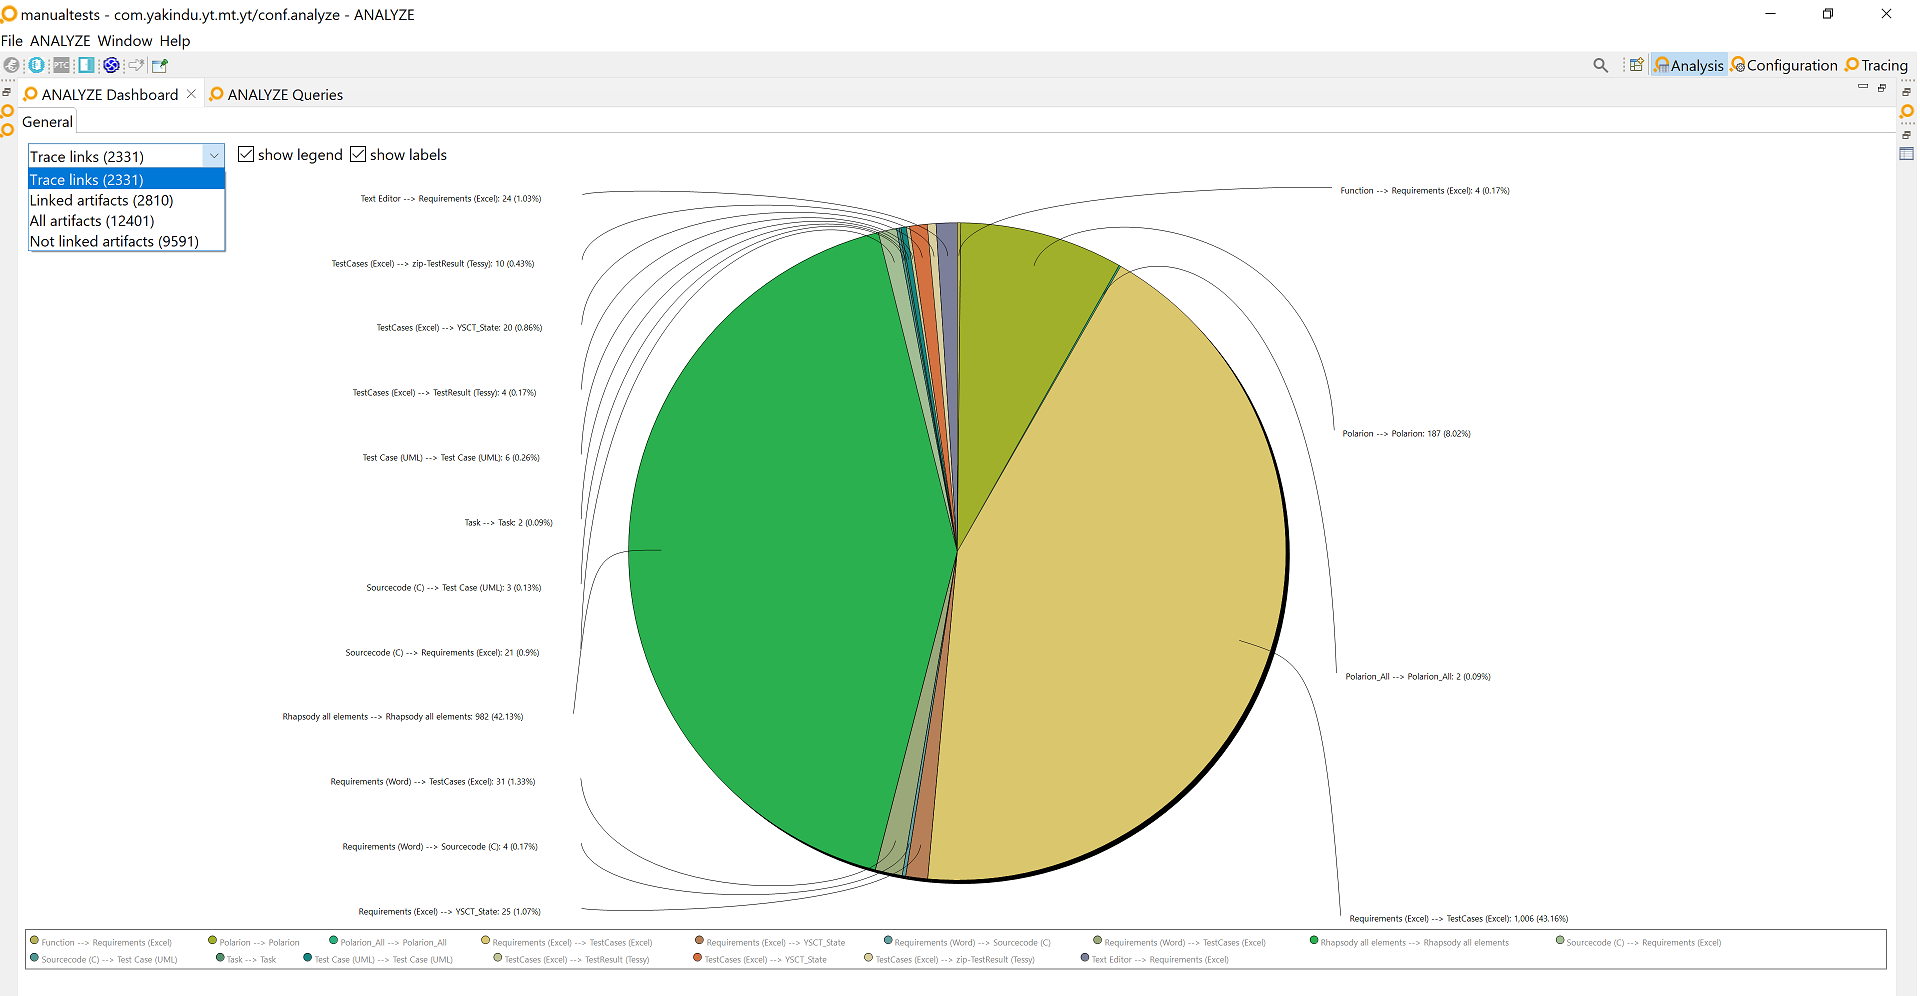 Pie chart and drop-down menu in the "ANALYZE Dashboard" view